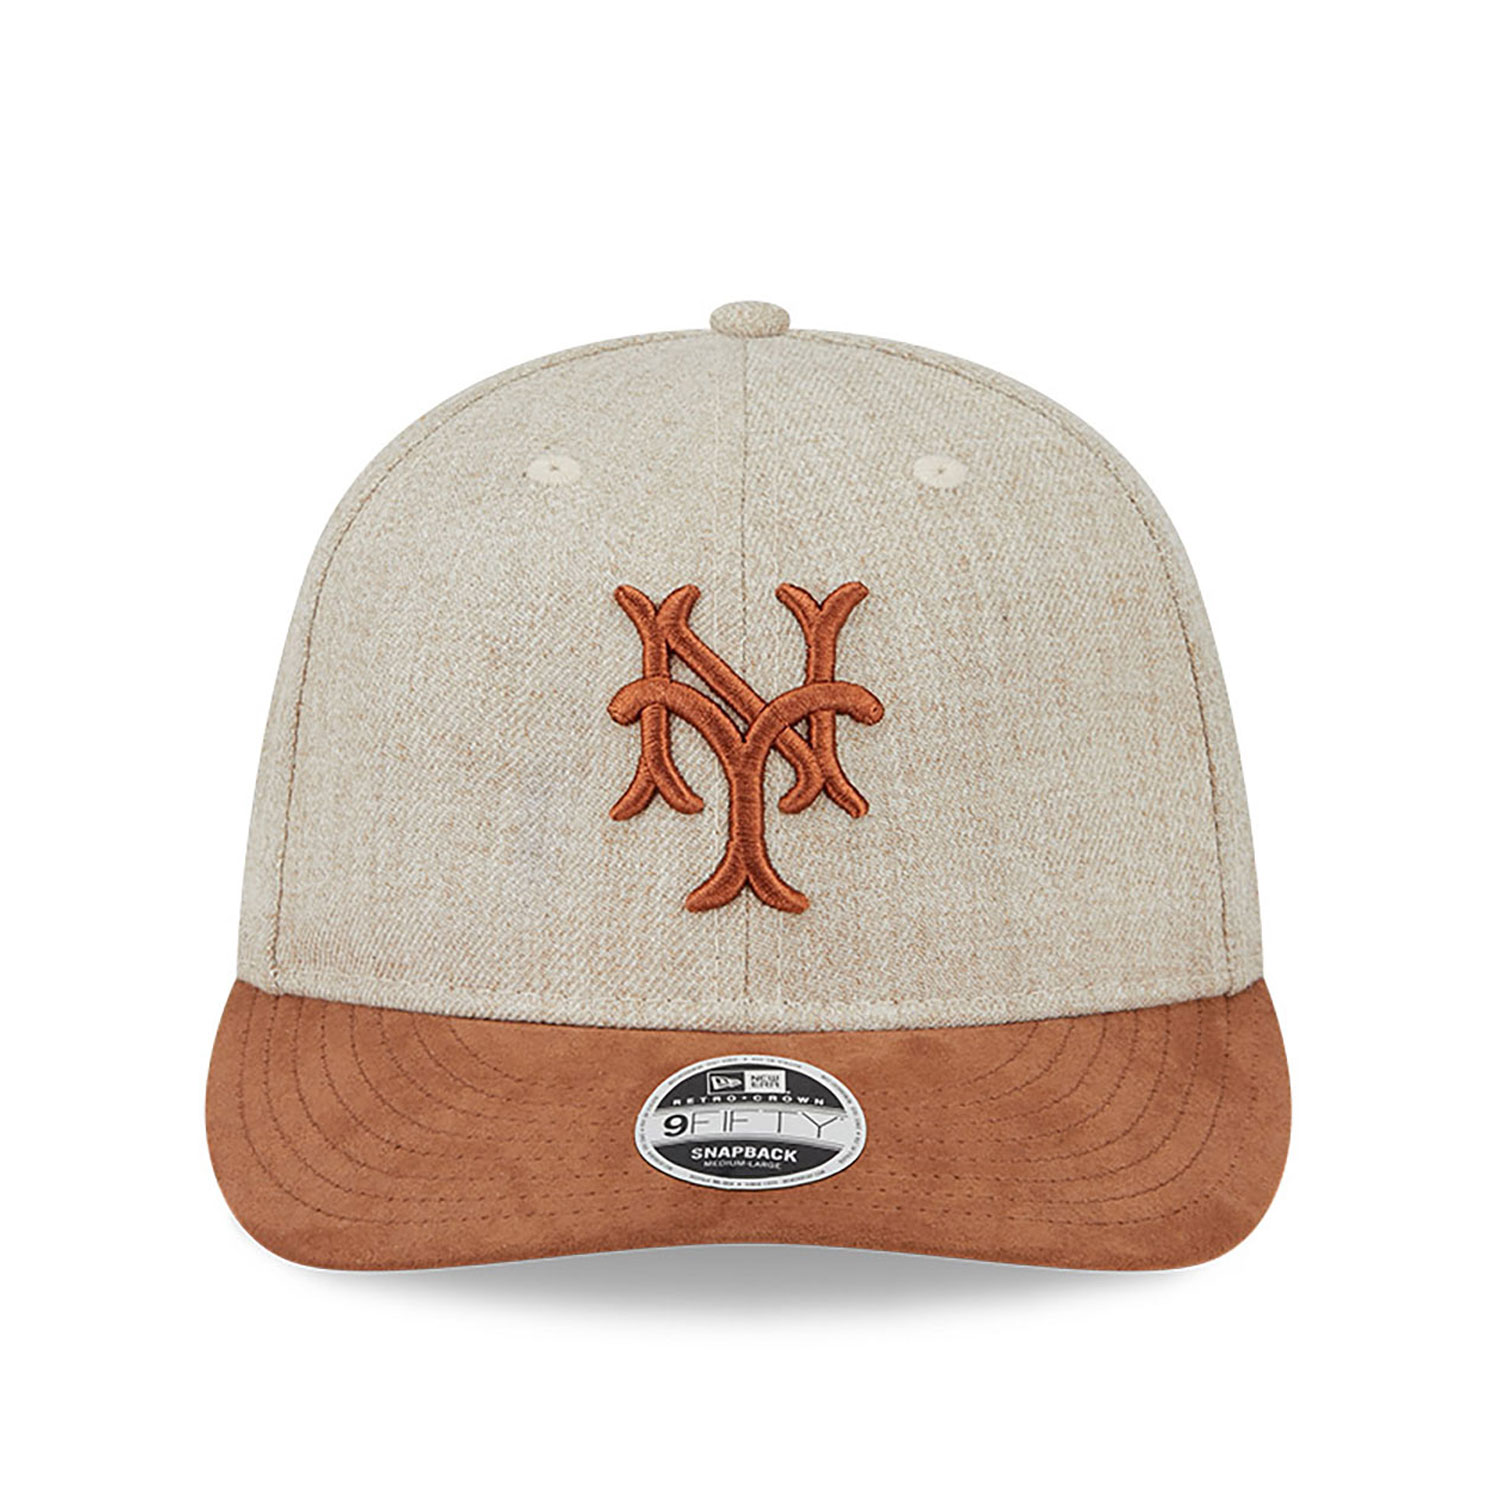 New York Mets MLB Two Tone Brown Retro Crown 9FIFTY Snapback Cap